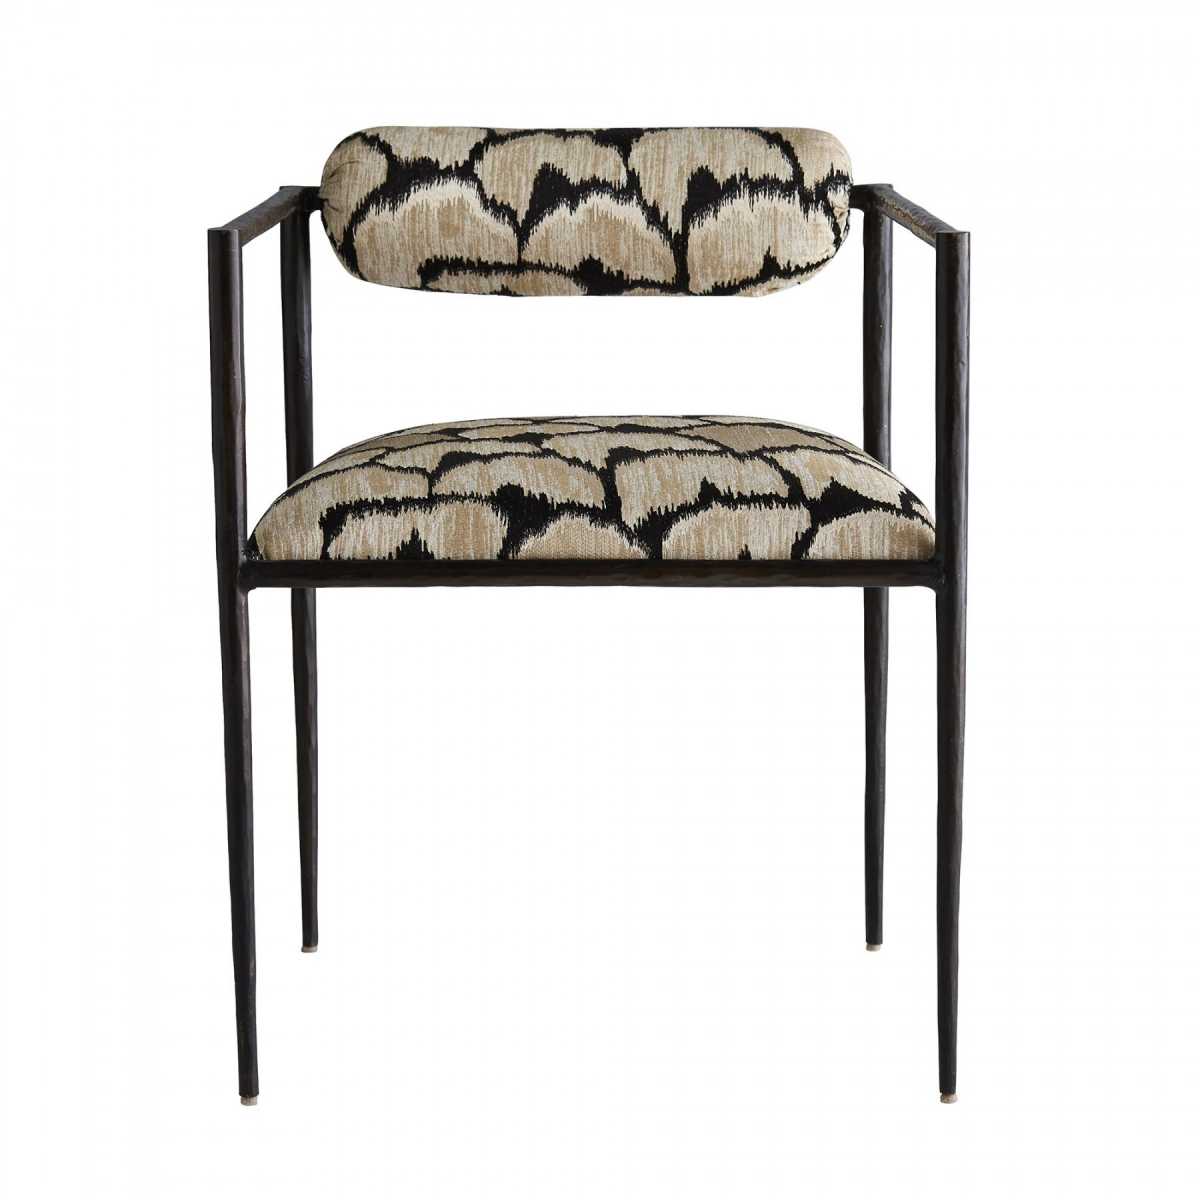 Forged Iron Barbana Chair Ocelot Embroidery - RSVP Style